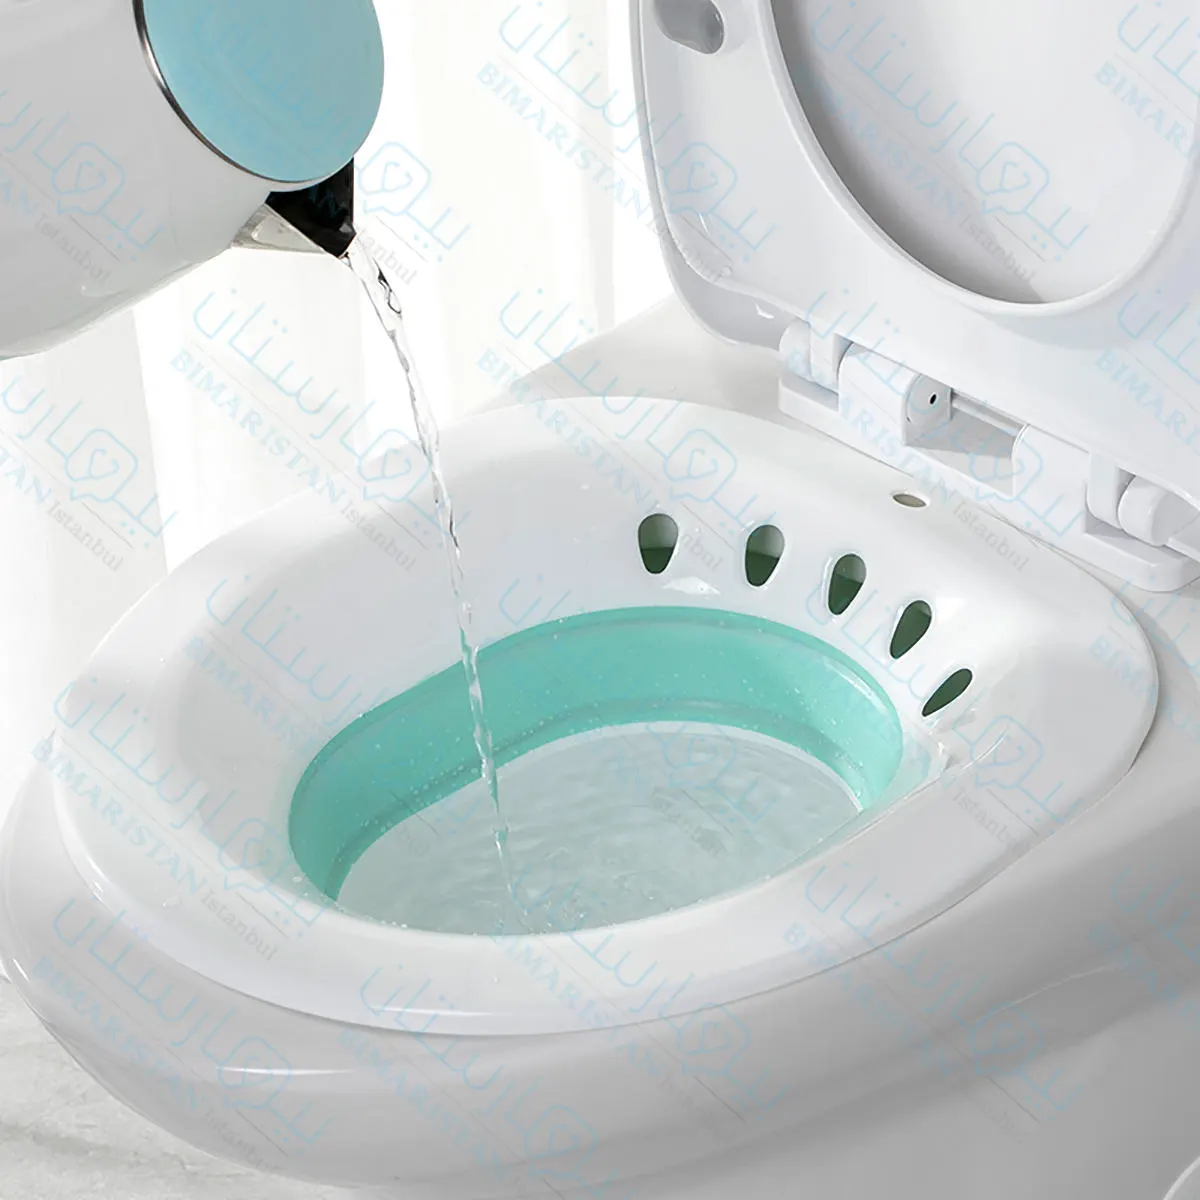 The sitz is placed on the toilet seat and filled with warm water for the patient to sit on